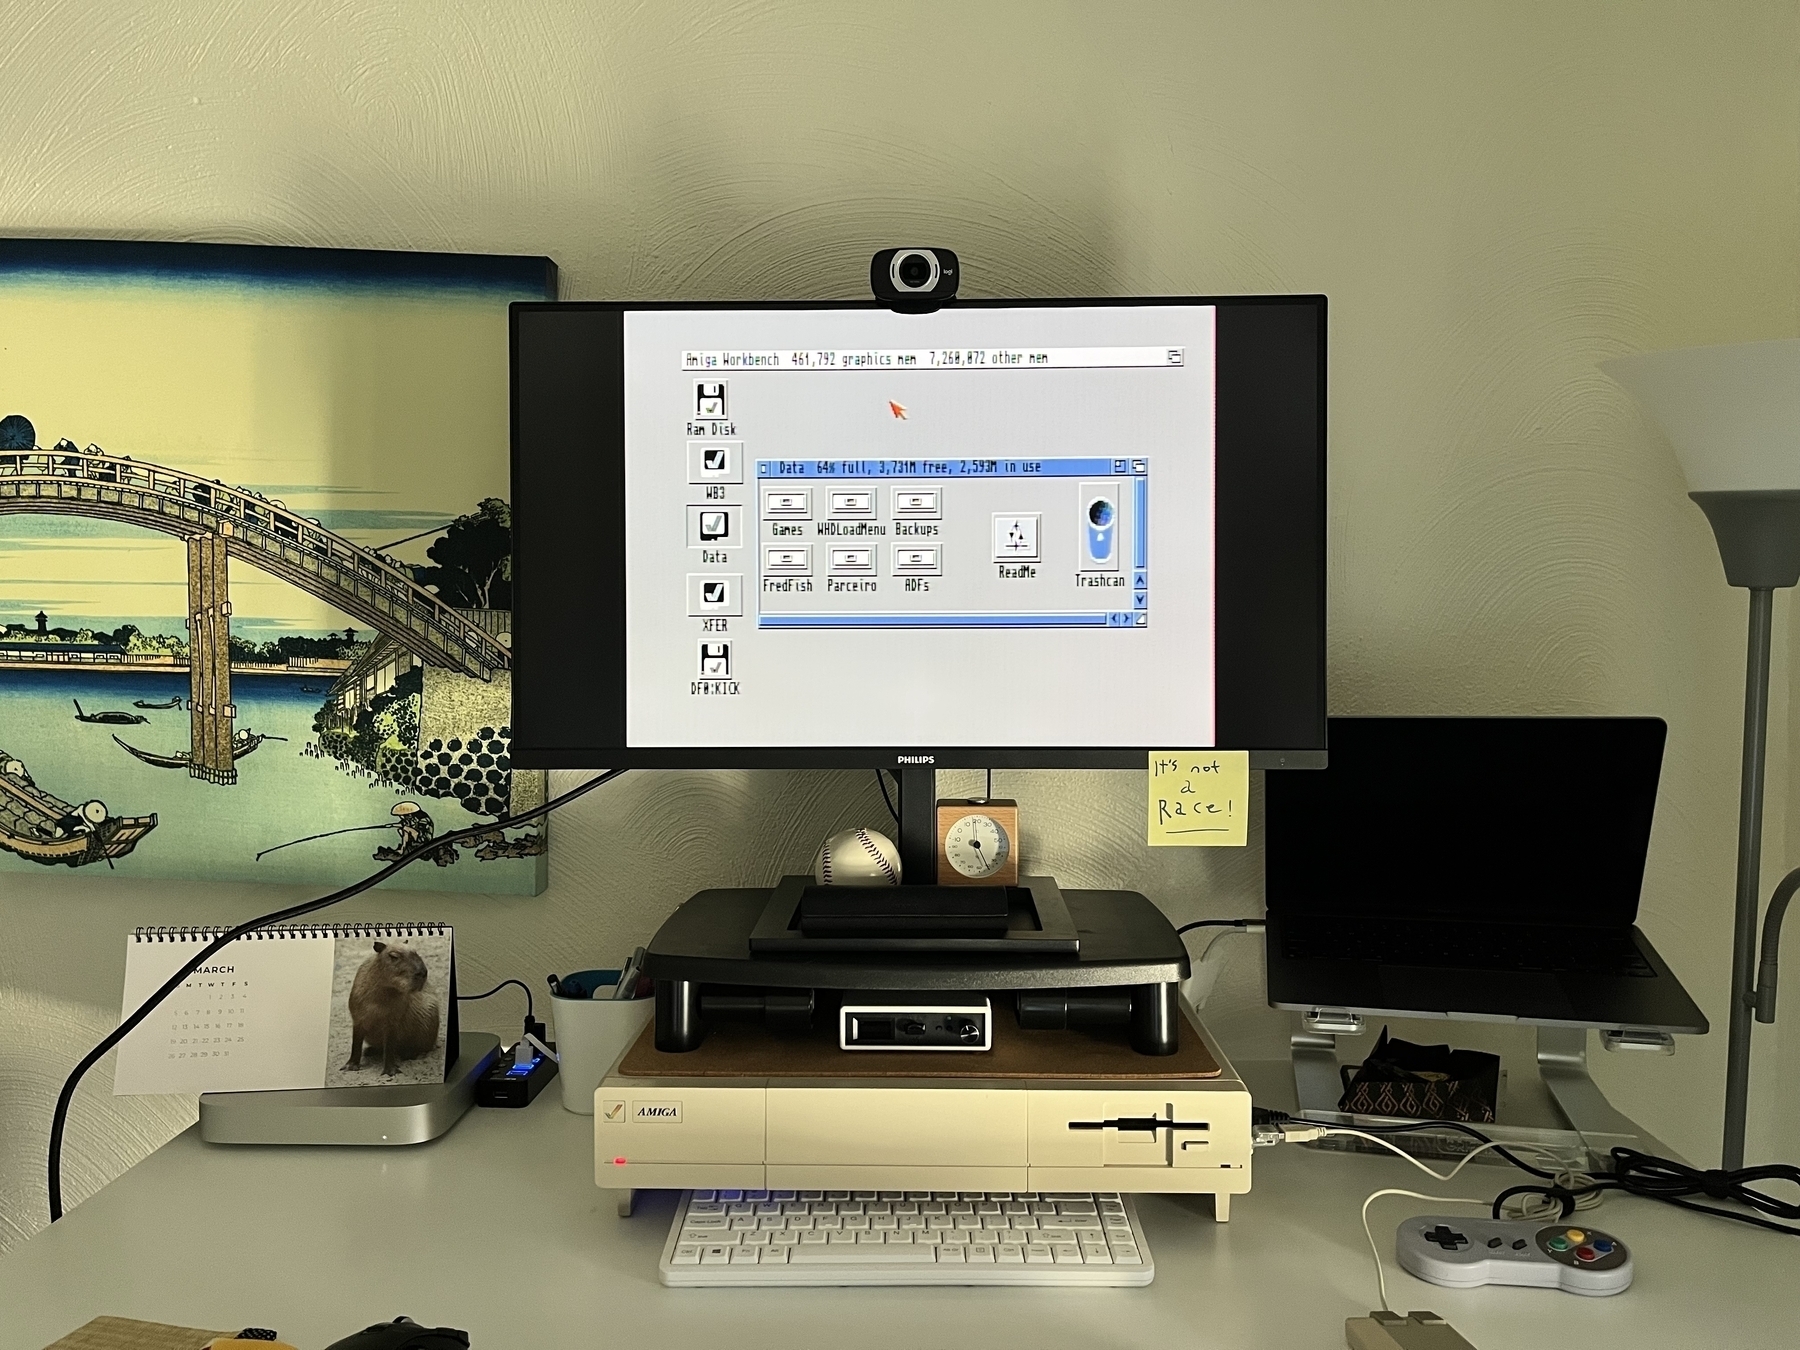 Amiga 1000 connected to 4K monitor